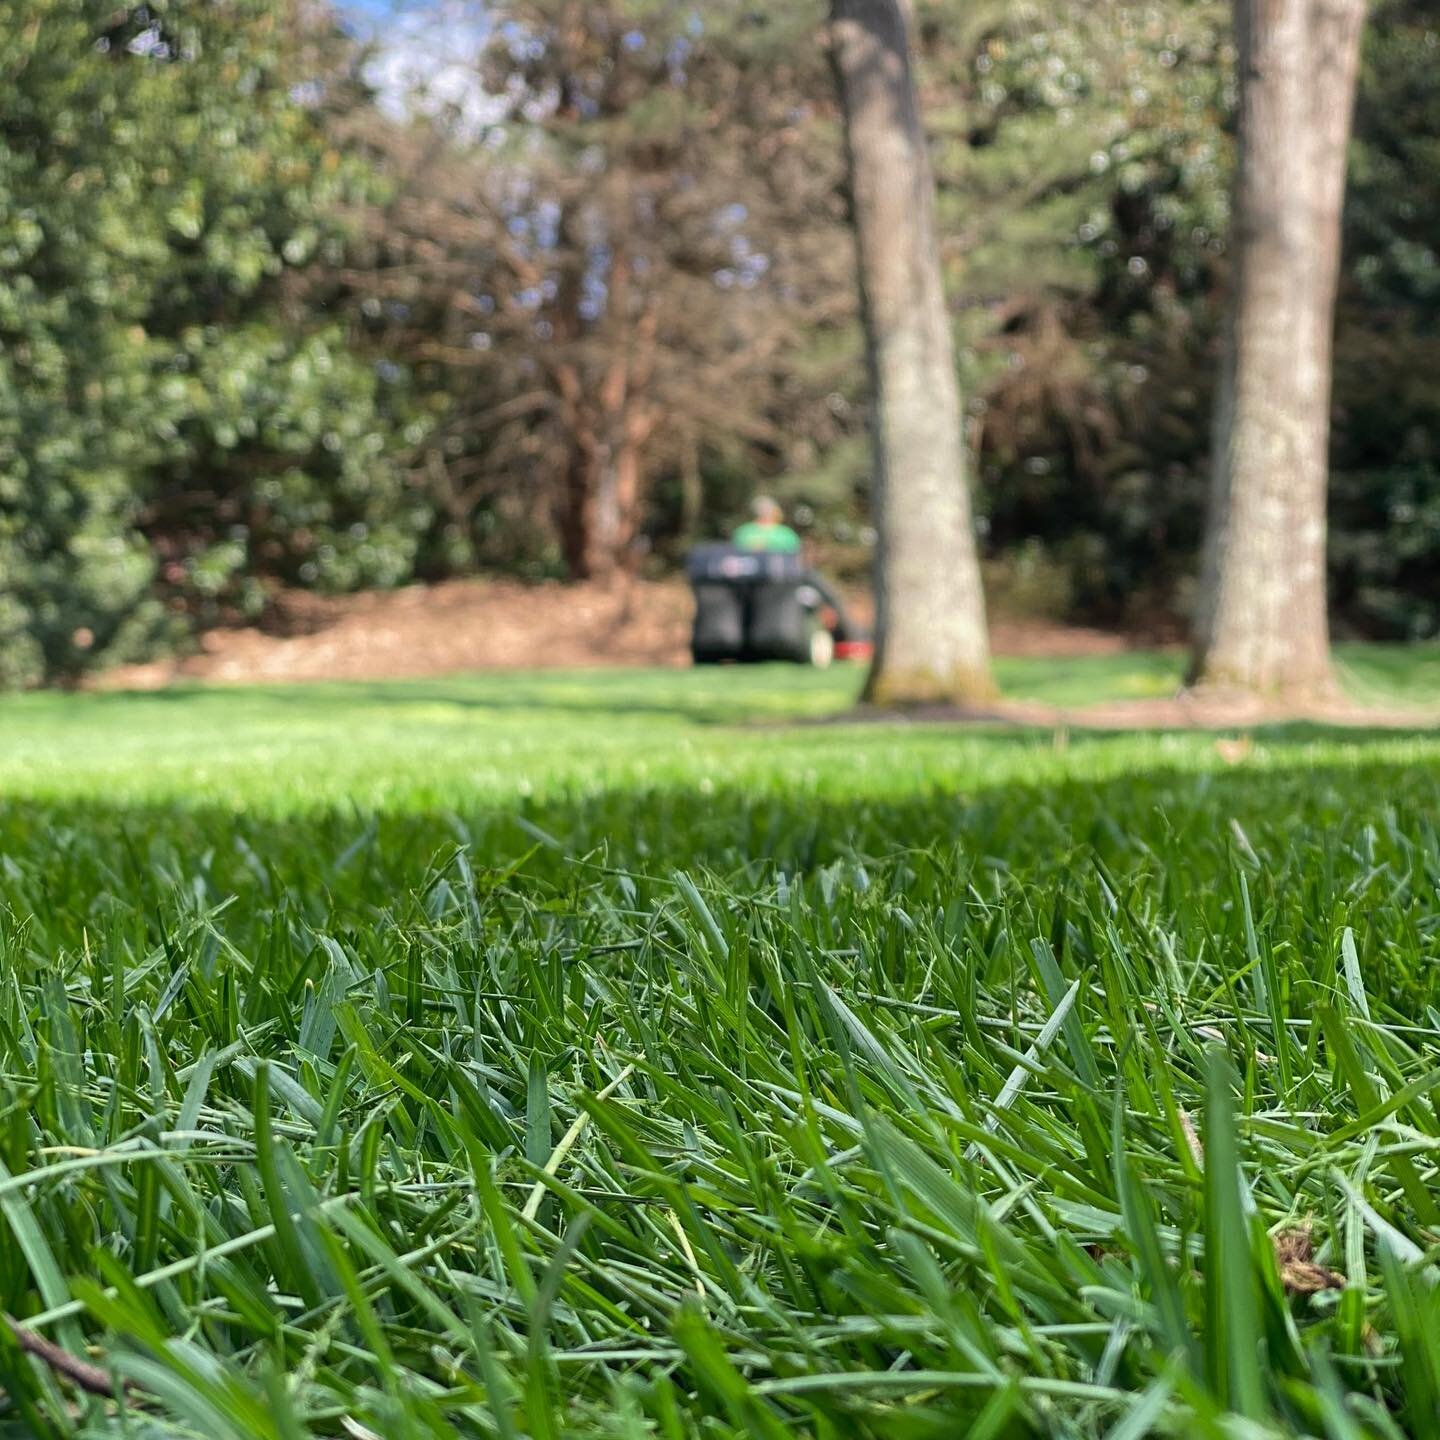 LAWN MAINTENANCE:

With growing season around the corner, we are looking forward to warmer days and striped fescue!